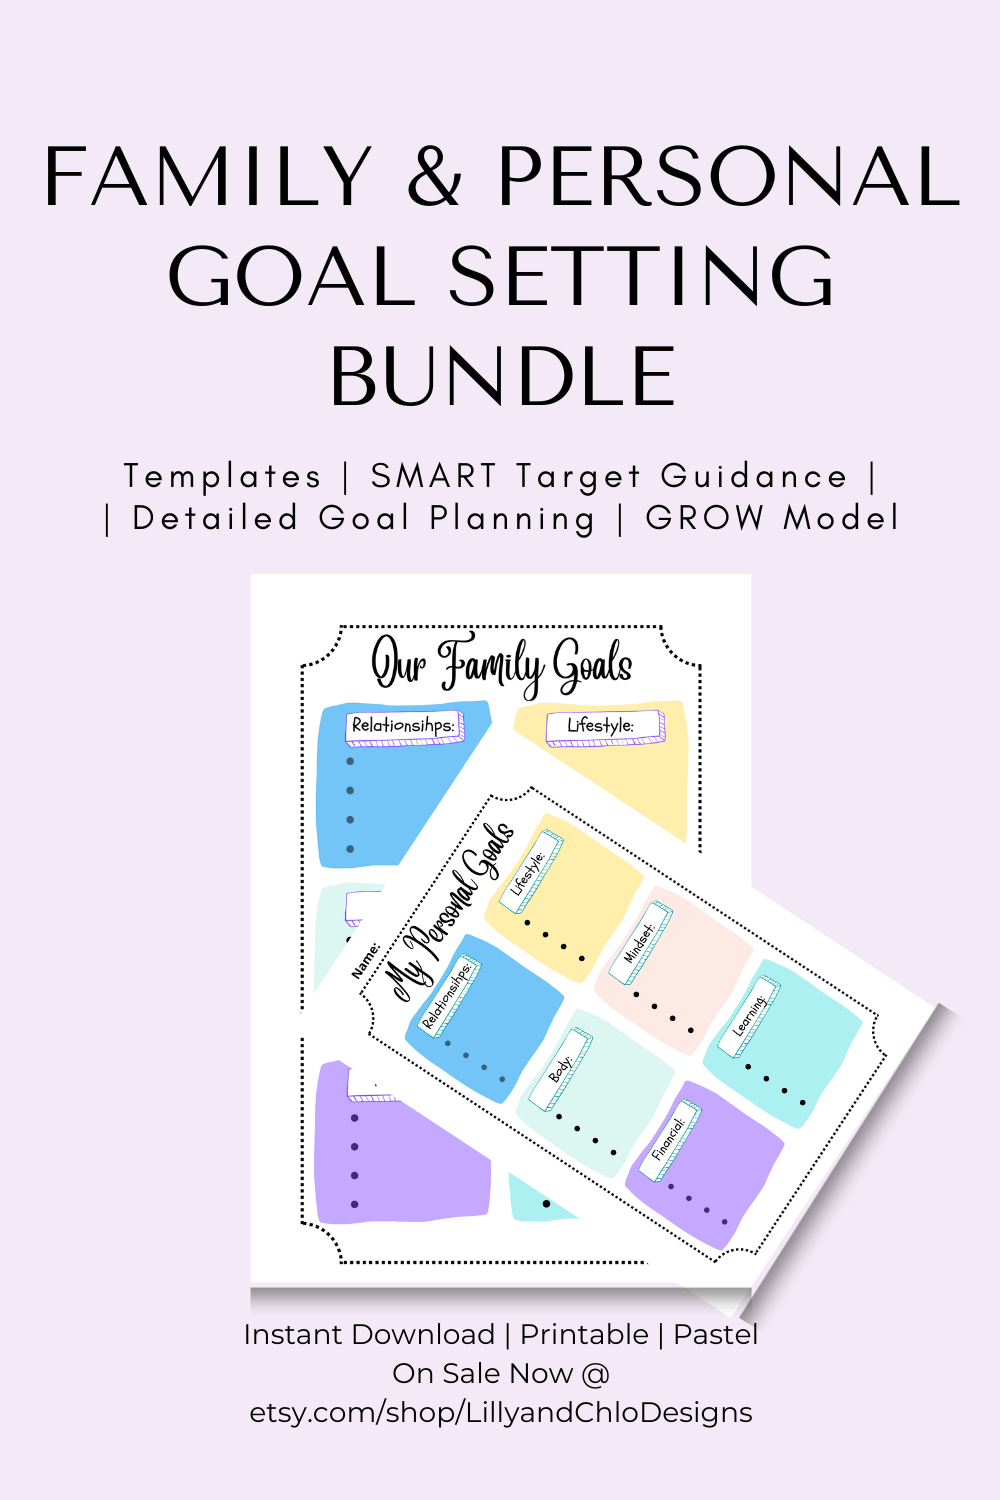 Family and Personal Goal Setting Bundle Marketing Poster. The words Templates, Smart target guidance, Detailed goal planning and Grow model are shown with Instant Download, Printable, Pastel and On Sale Now at the bottom of the Family and Personal Goal Setting example images.